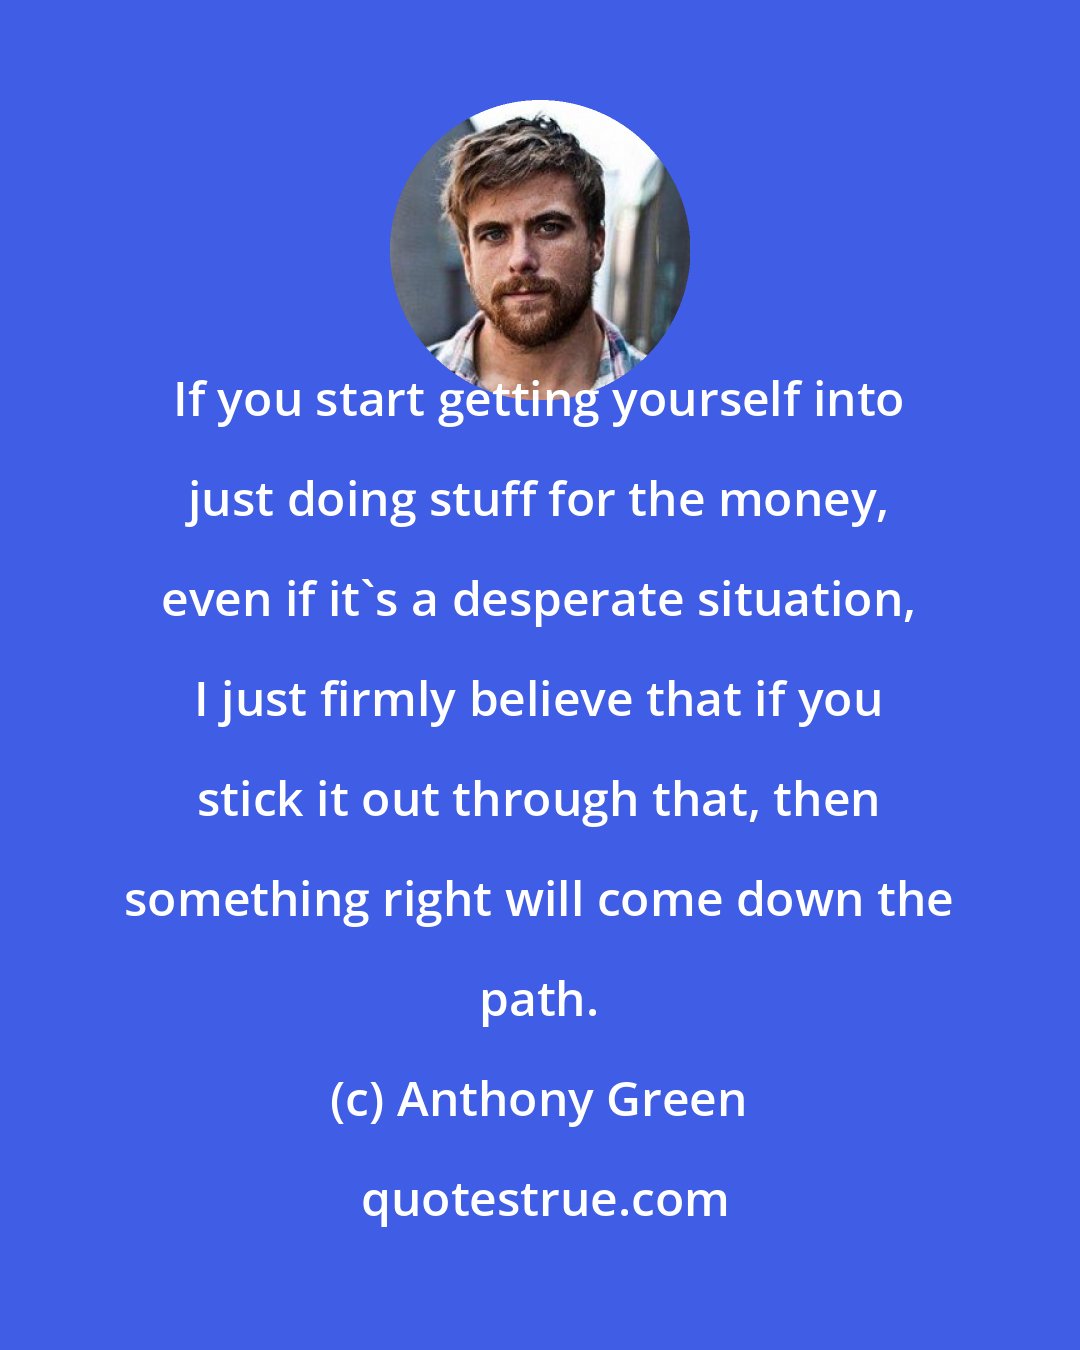 Anthony Green: If you start getting yourself into just doing stuff for the money, even if it's a desperate situation, I just firmly believe that if you stick it out through that, then something right will come down the path.